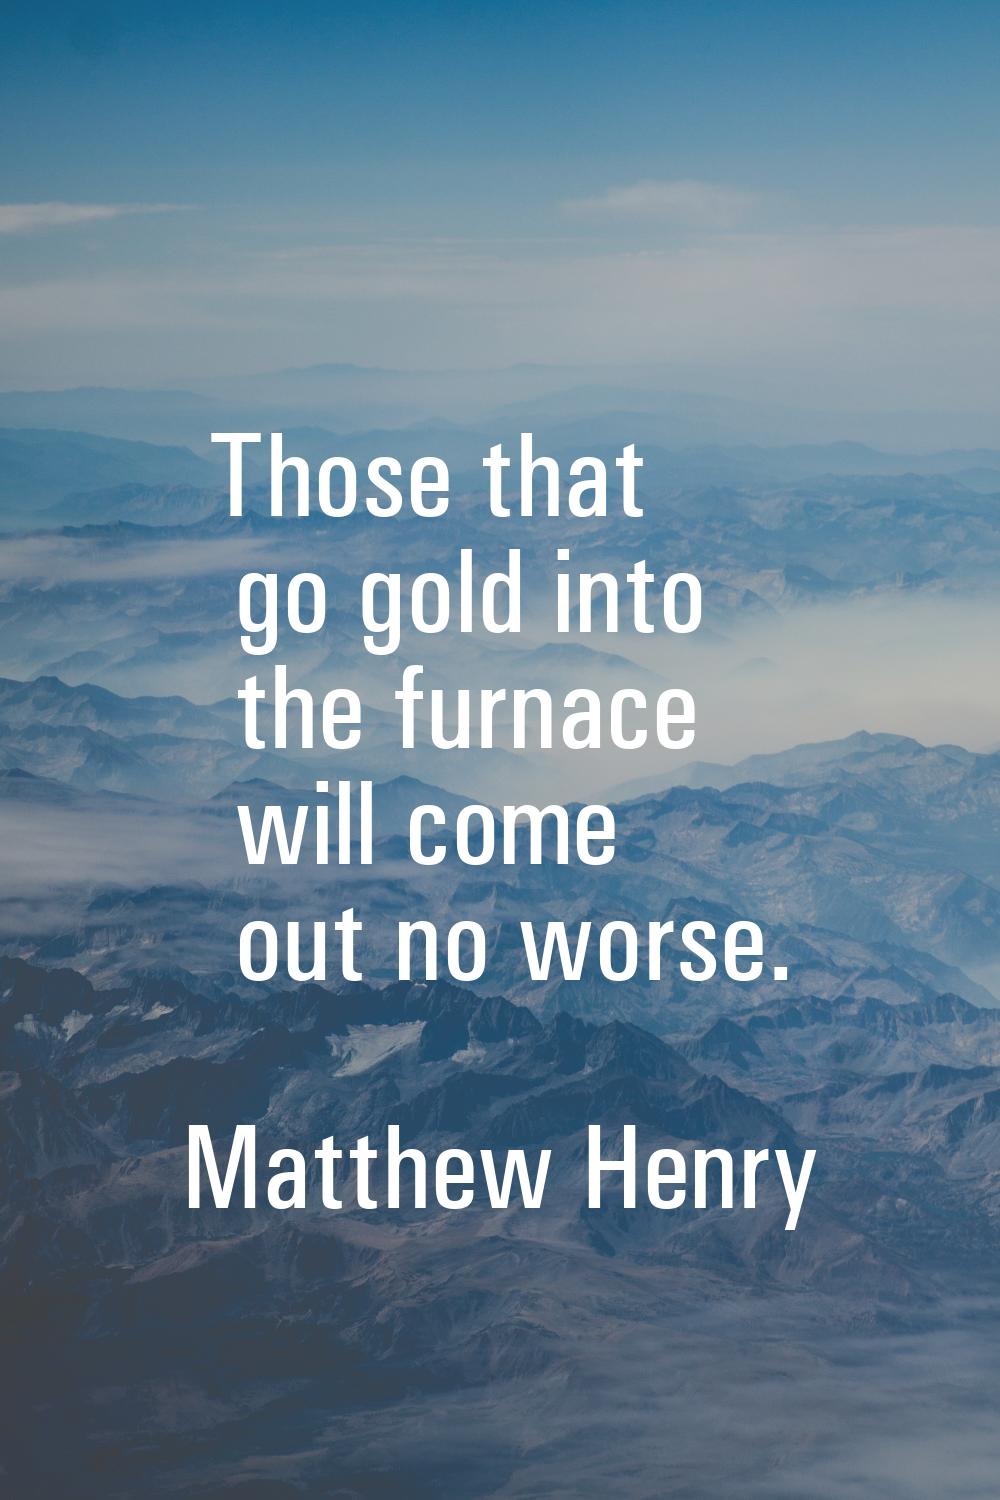 Those that go gold into the furnace will come out no worse.